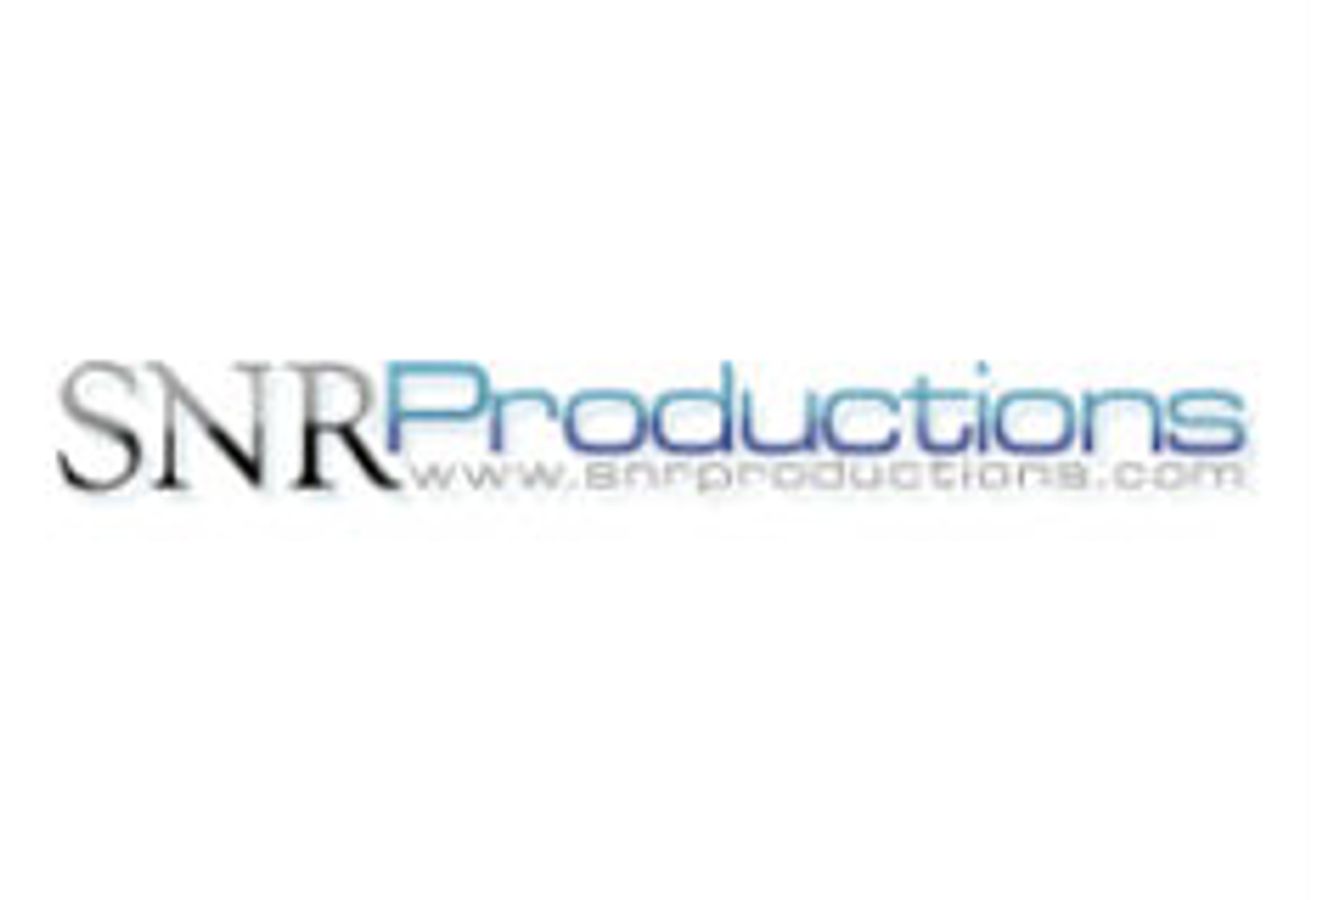 SNRProductions